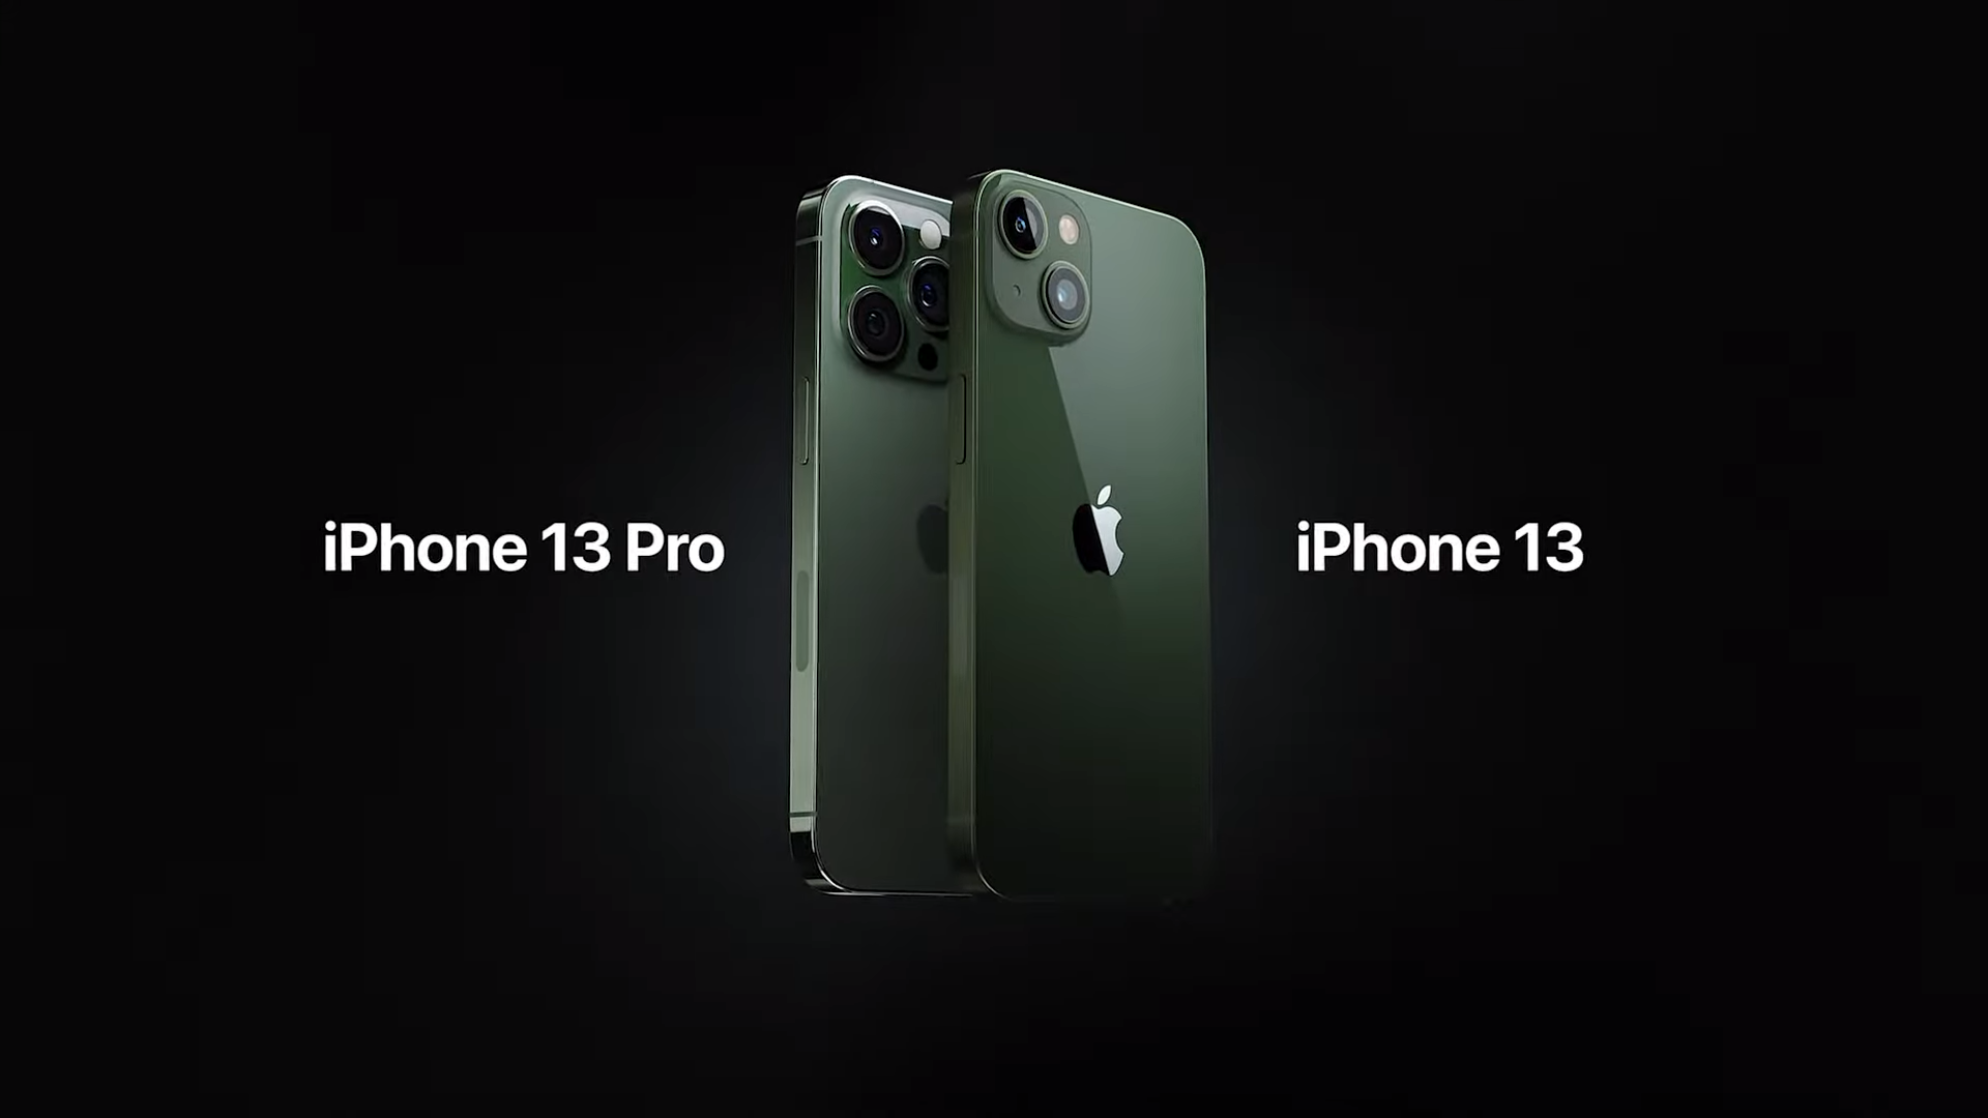 new green iphone